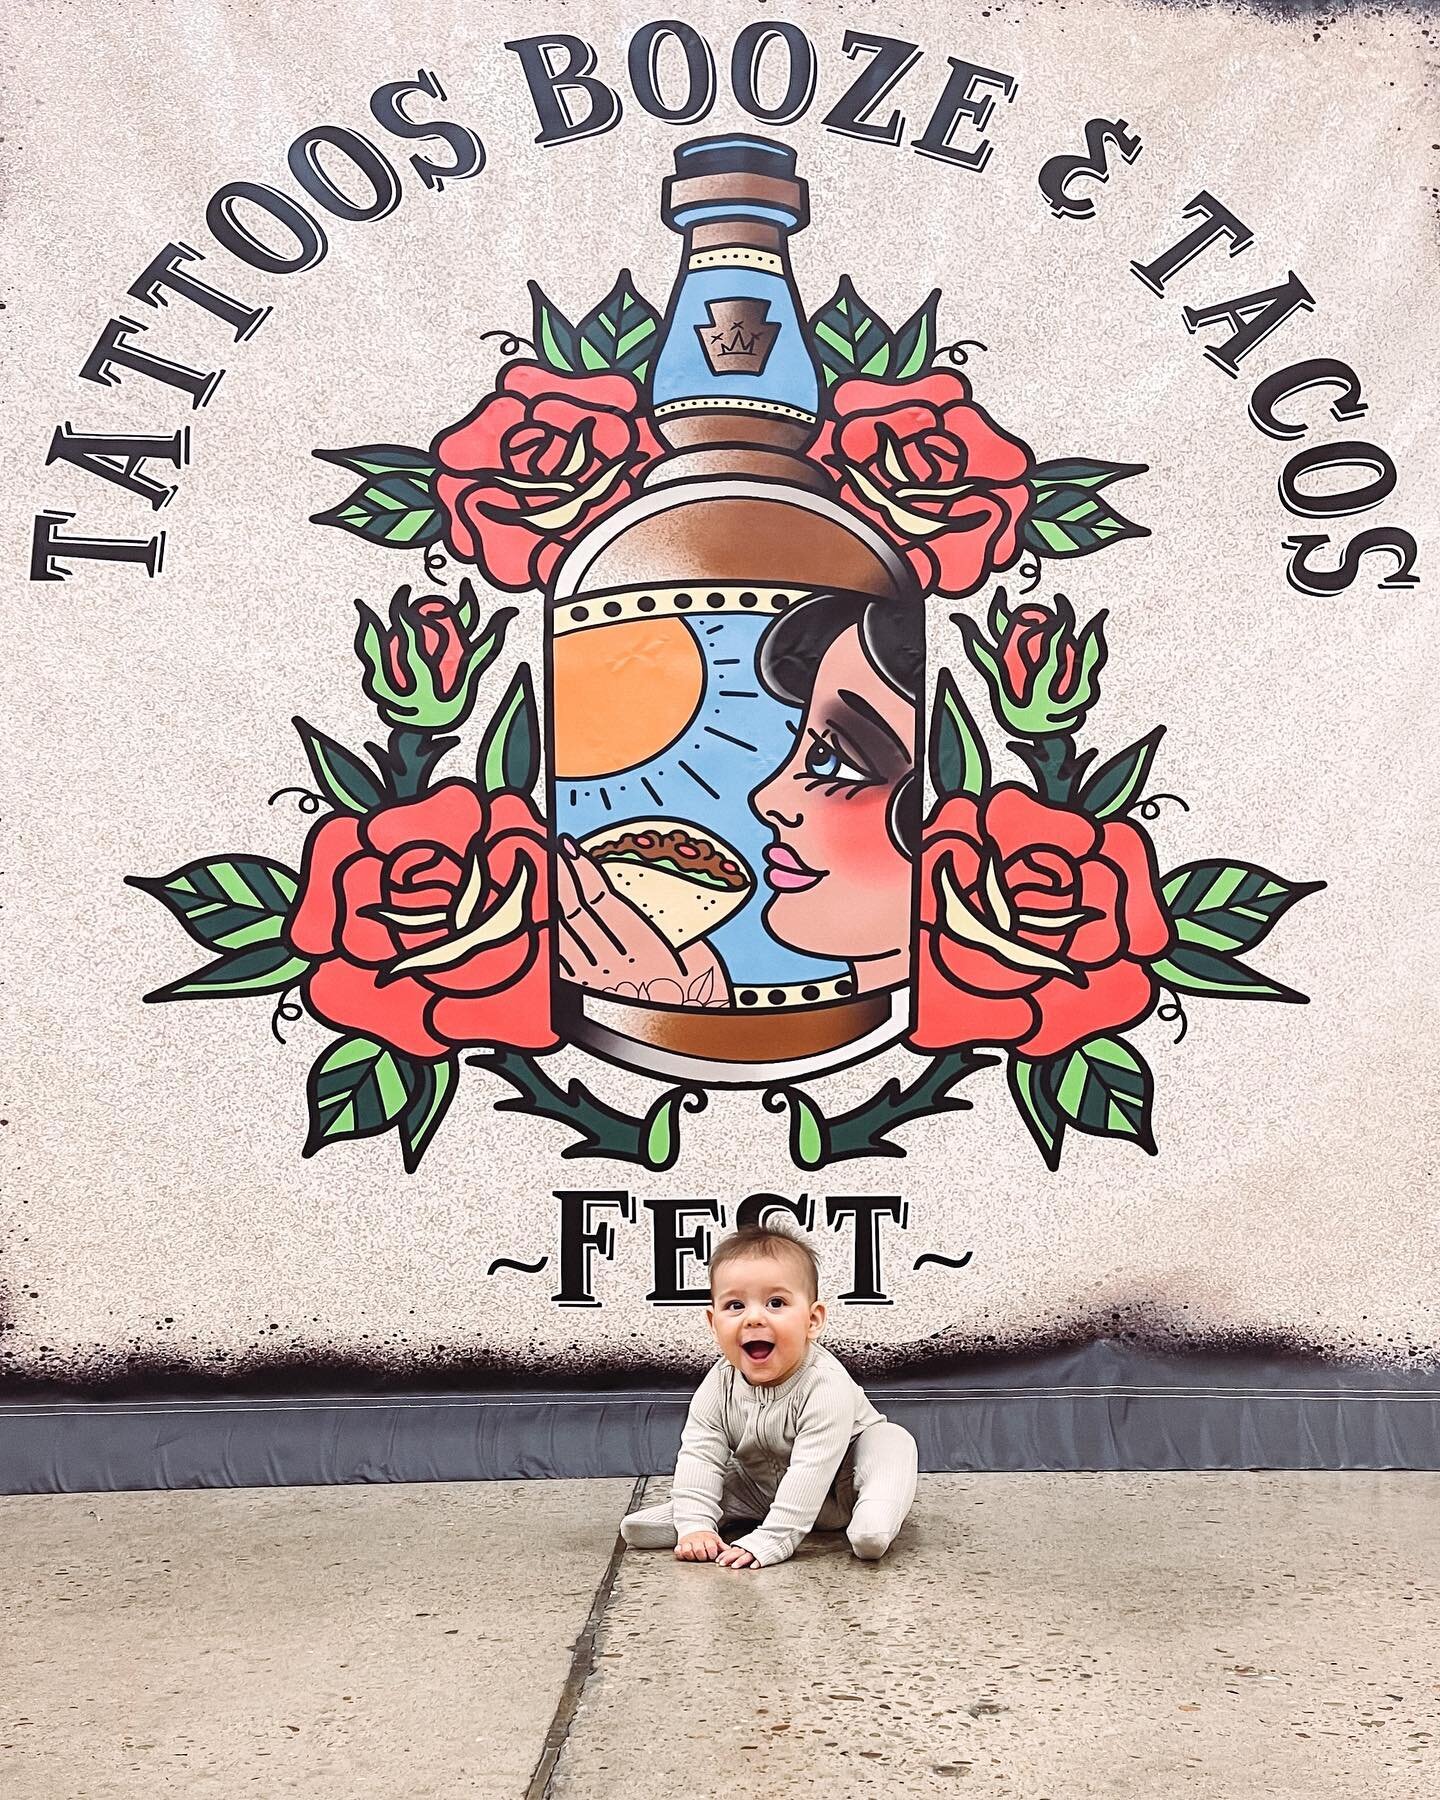 The cutest member of our team, Jaxon 🖤 he had a blast at his first tattoo convention @tattoos_booze_tacos_fest and seeing the BlackOak team hard at work!